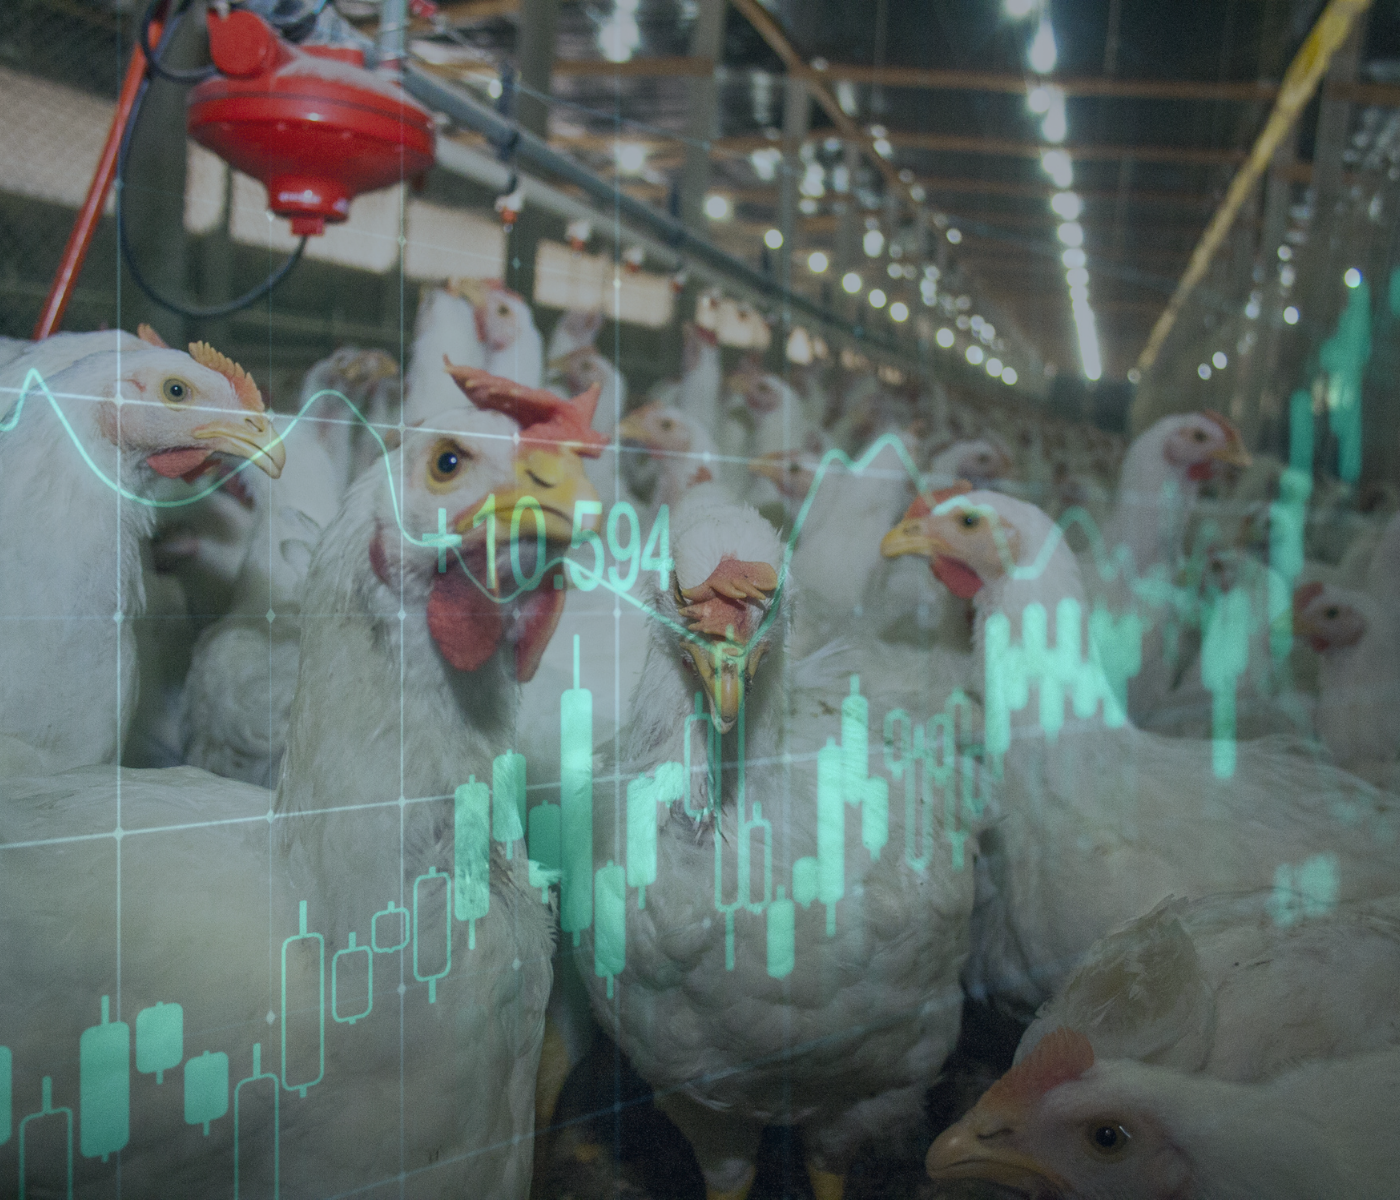 Morocco’s poultry sector faces ‘real disaster’